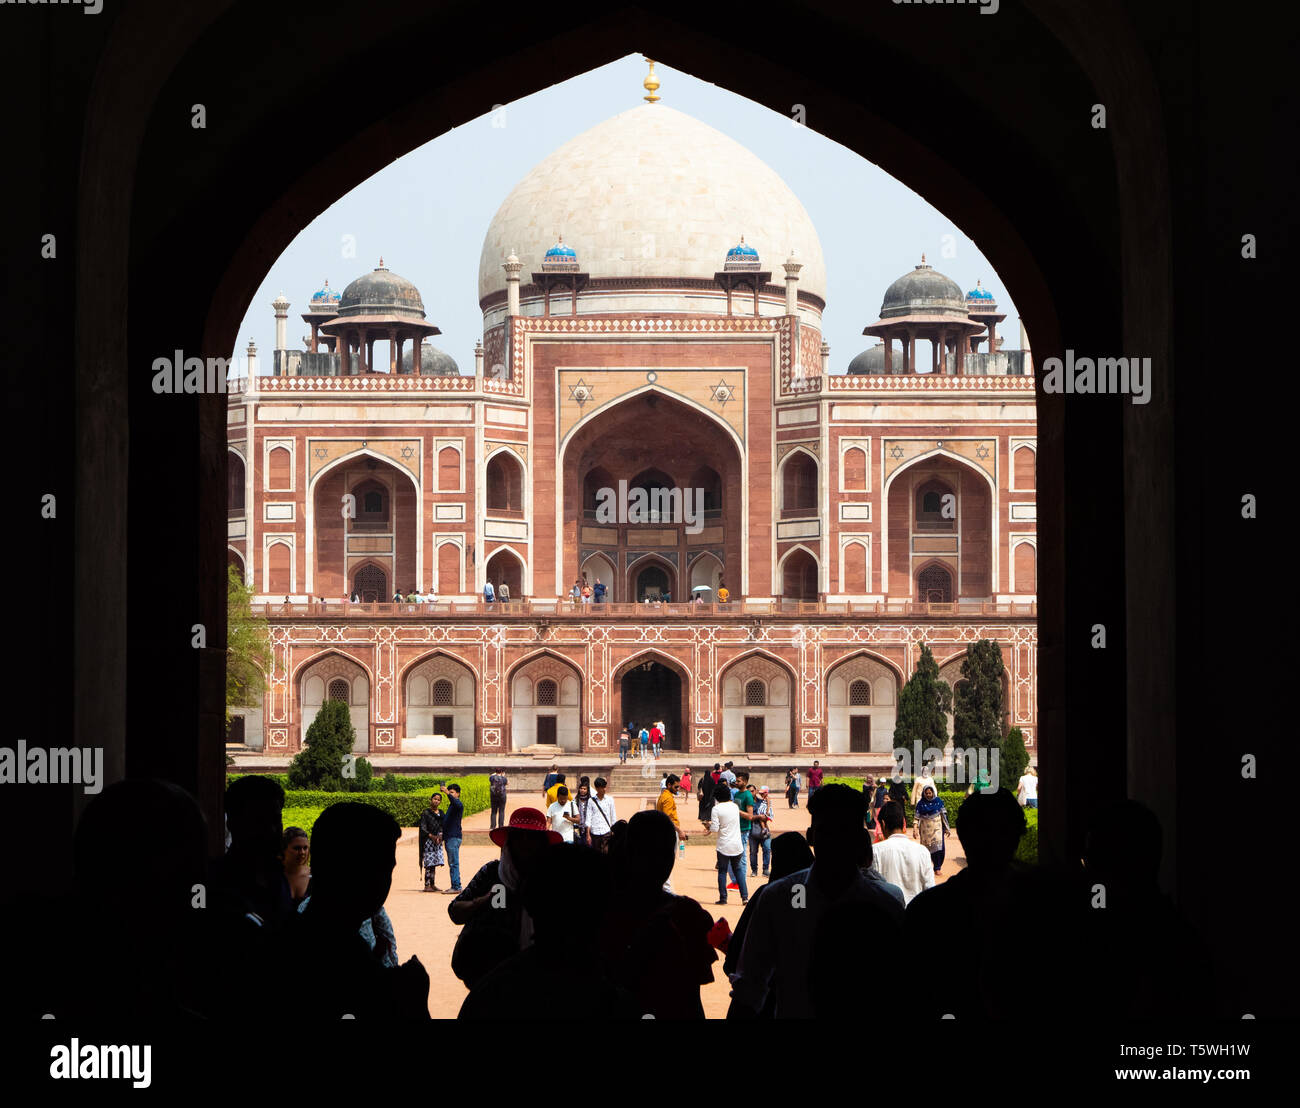 Humayun's Tomb or Maqbara-i Humayun in Hindi commissioned by the Mughal emperor's first wife Bega Begum - New Delhi in Northern India Stock Photo